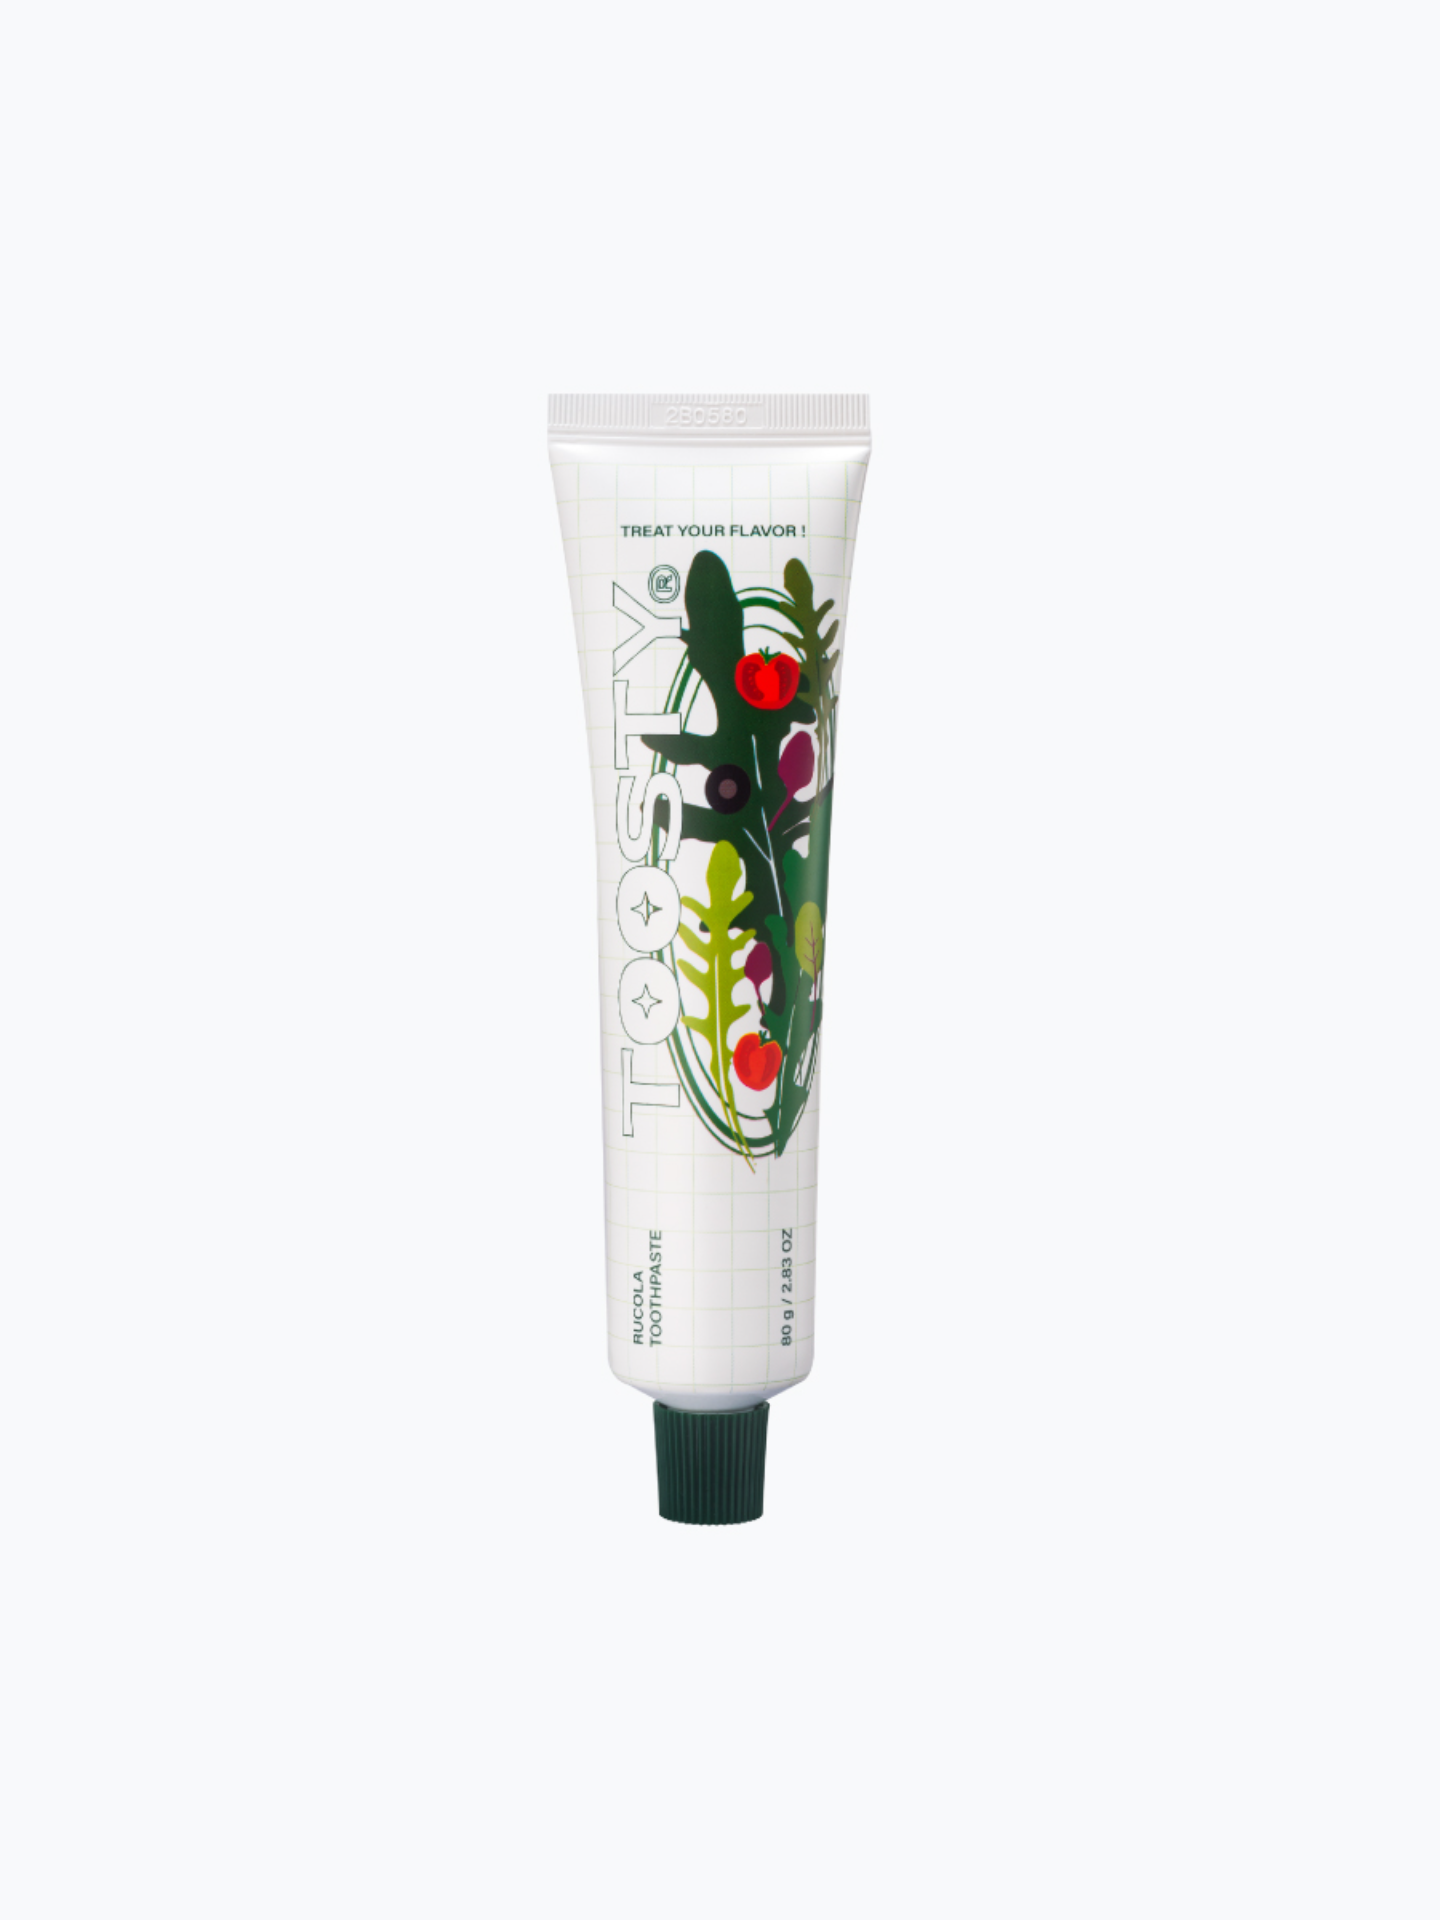 [Toosty] RUCOLA TOOTHPASTE 80g